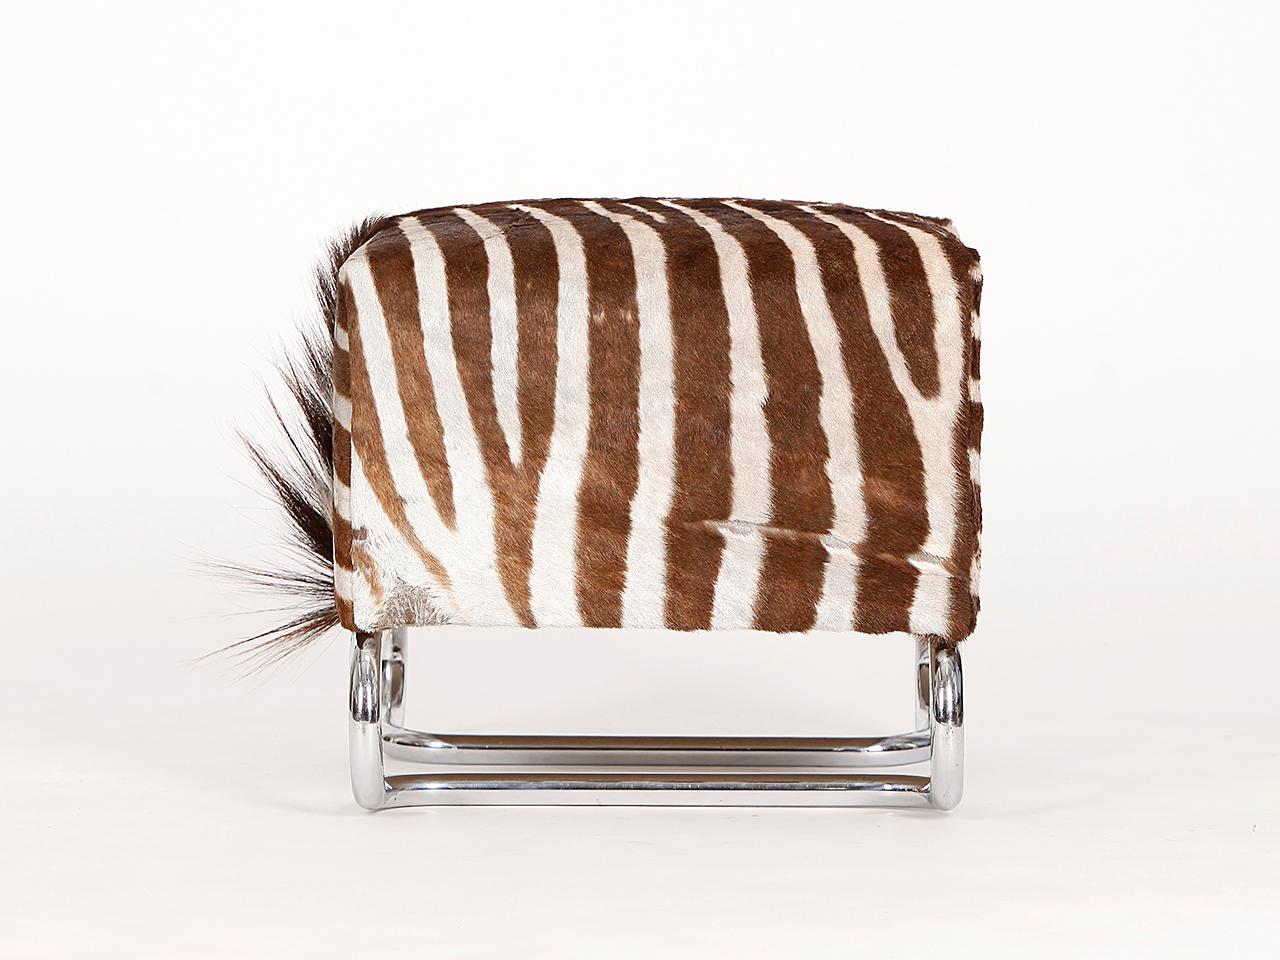 Made in the former Czechoslovakia in the 1930s. Completely reupholstered with new innerspring. Covered with an original vintage zebra skin. The chromed steel tube in very nice condition.